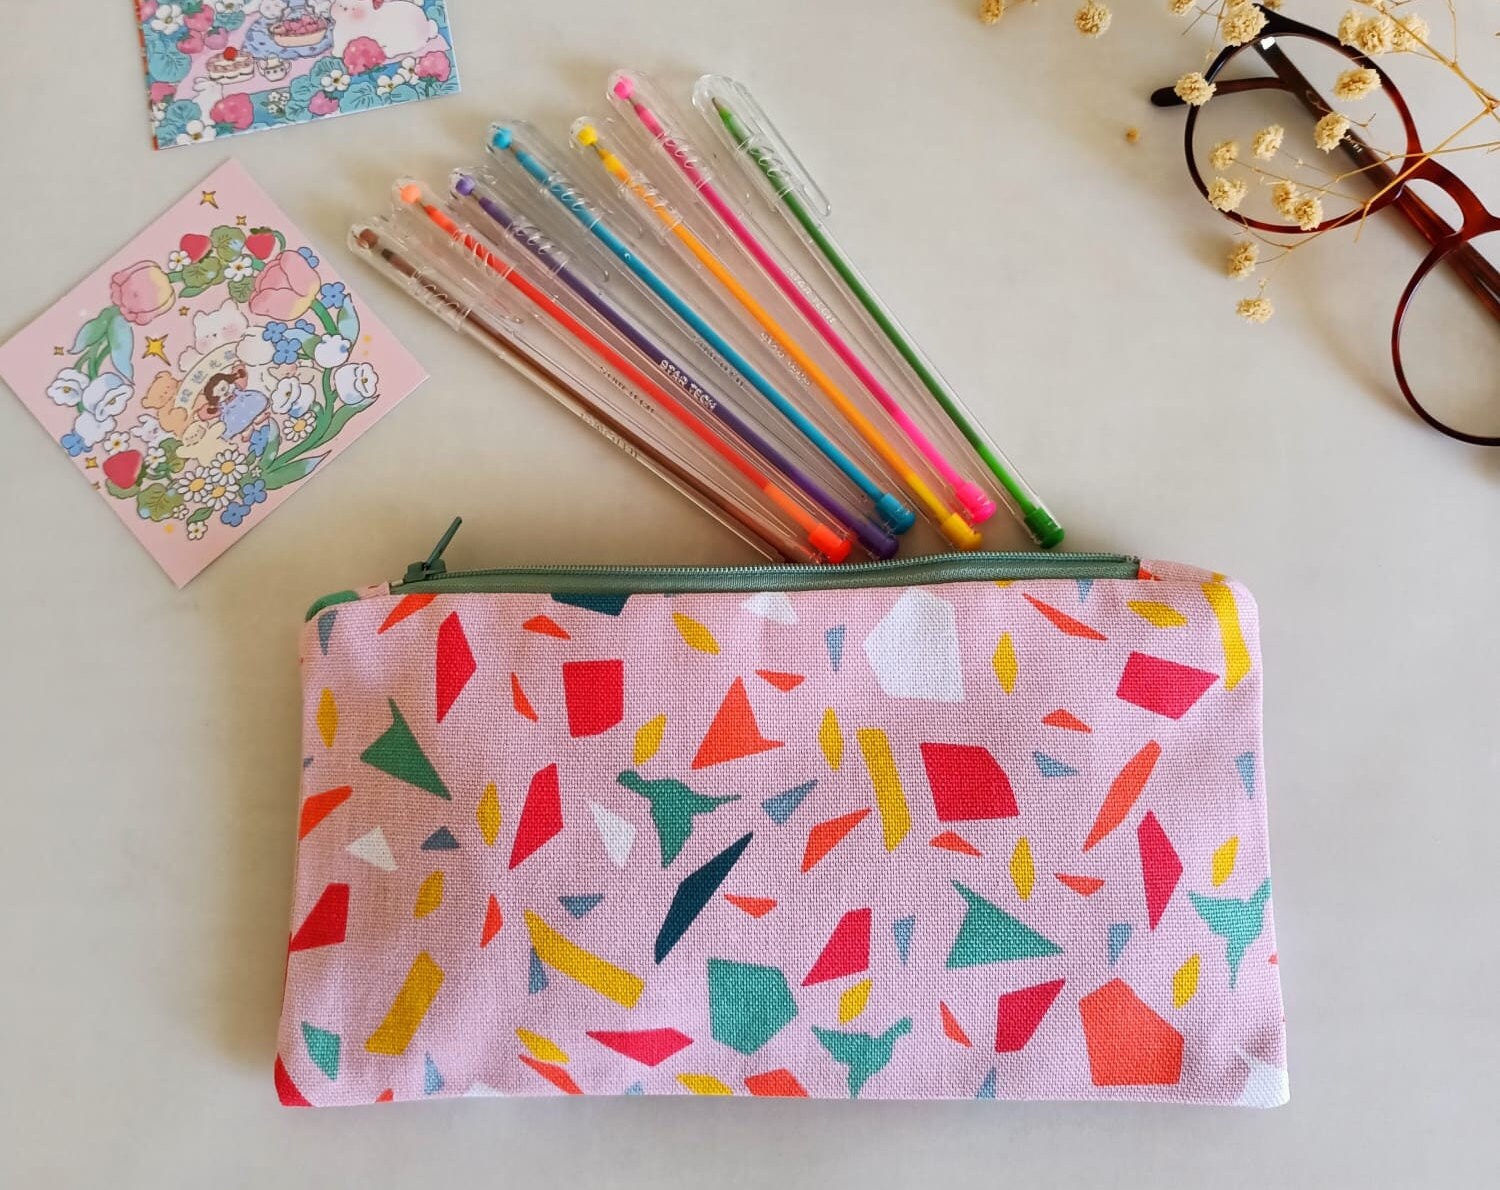 Fabric Pencil Cases, Cheap Pencil Bag,cheal Pencil Case,promotional Pencil  Cases With Custom Design - Buy China Wholesale Fabric Pencil Cases $1